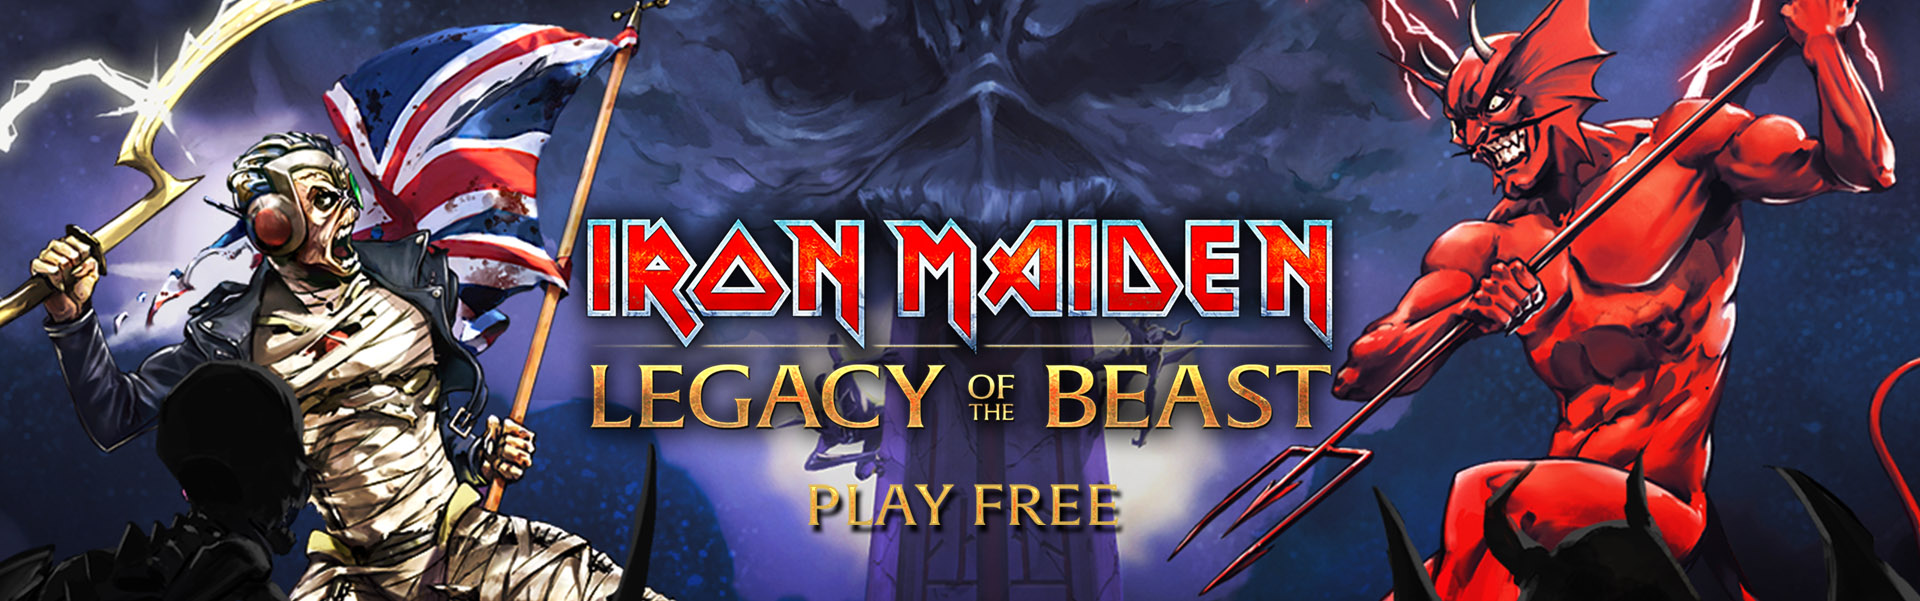 Iron maiden game | be part of the legacy